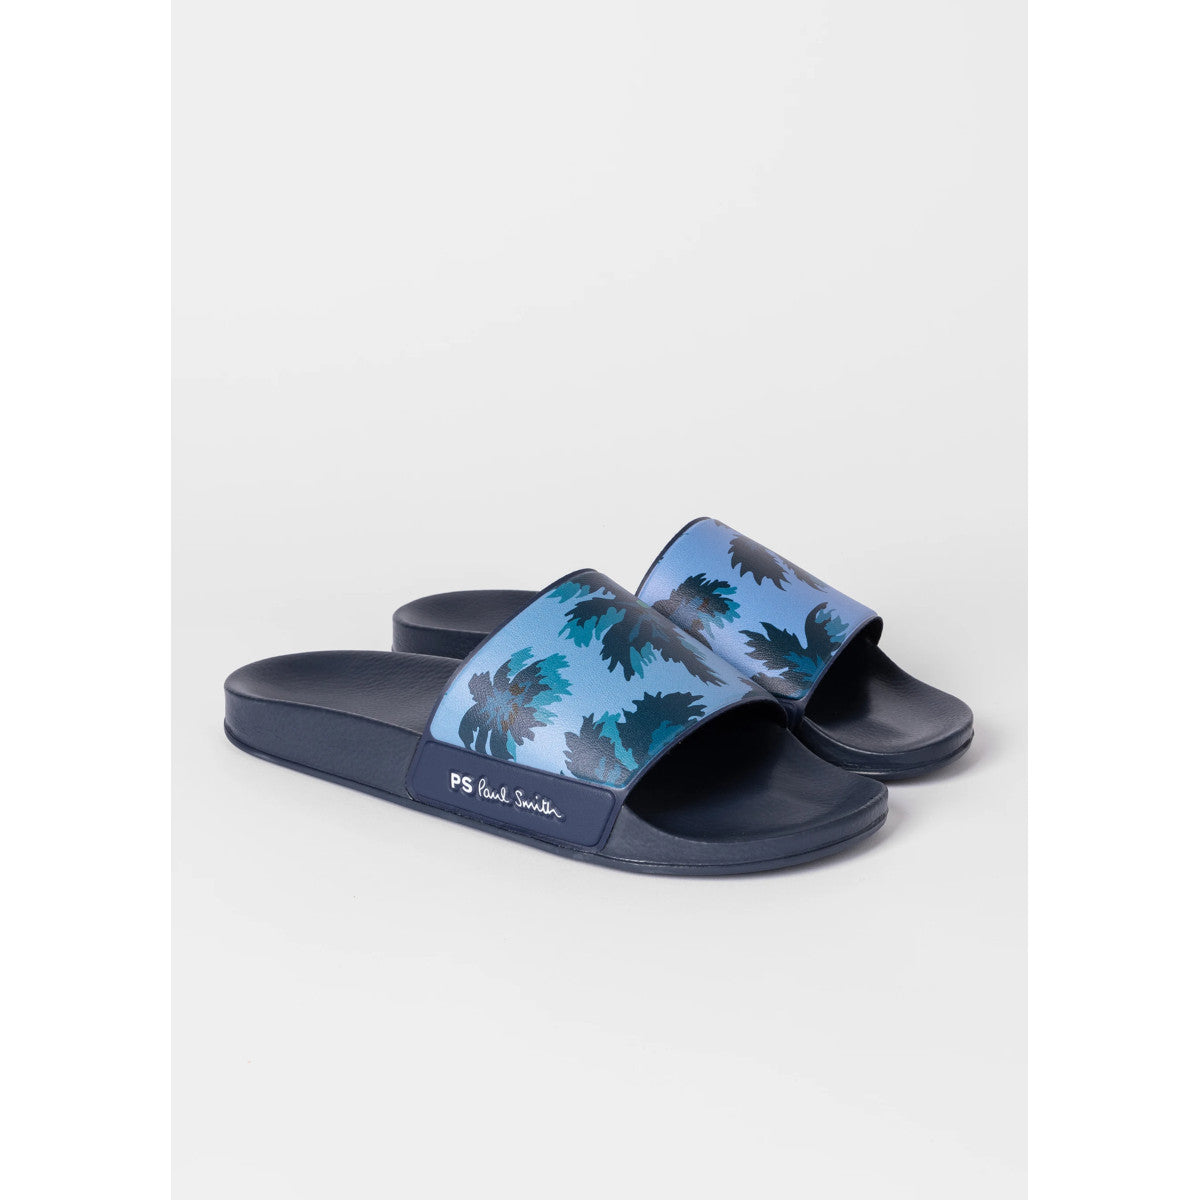 PS Paul Smith Nyro Sliders 92 Blue Floral